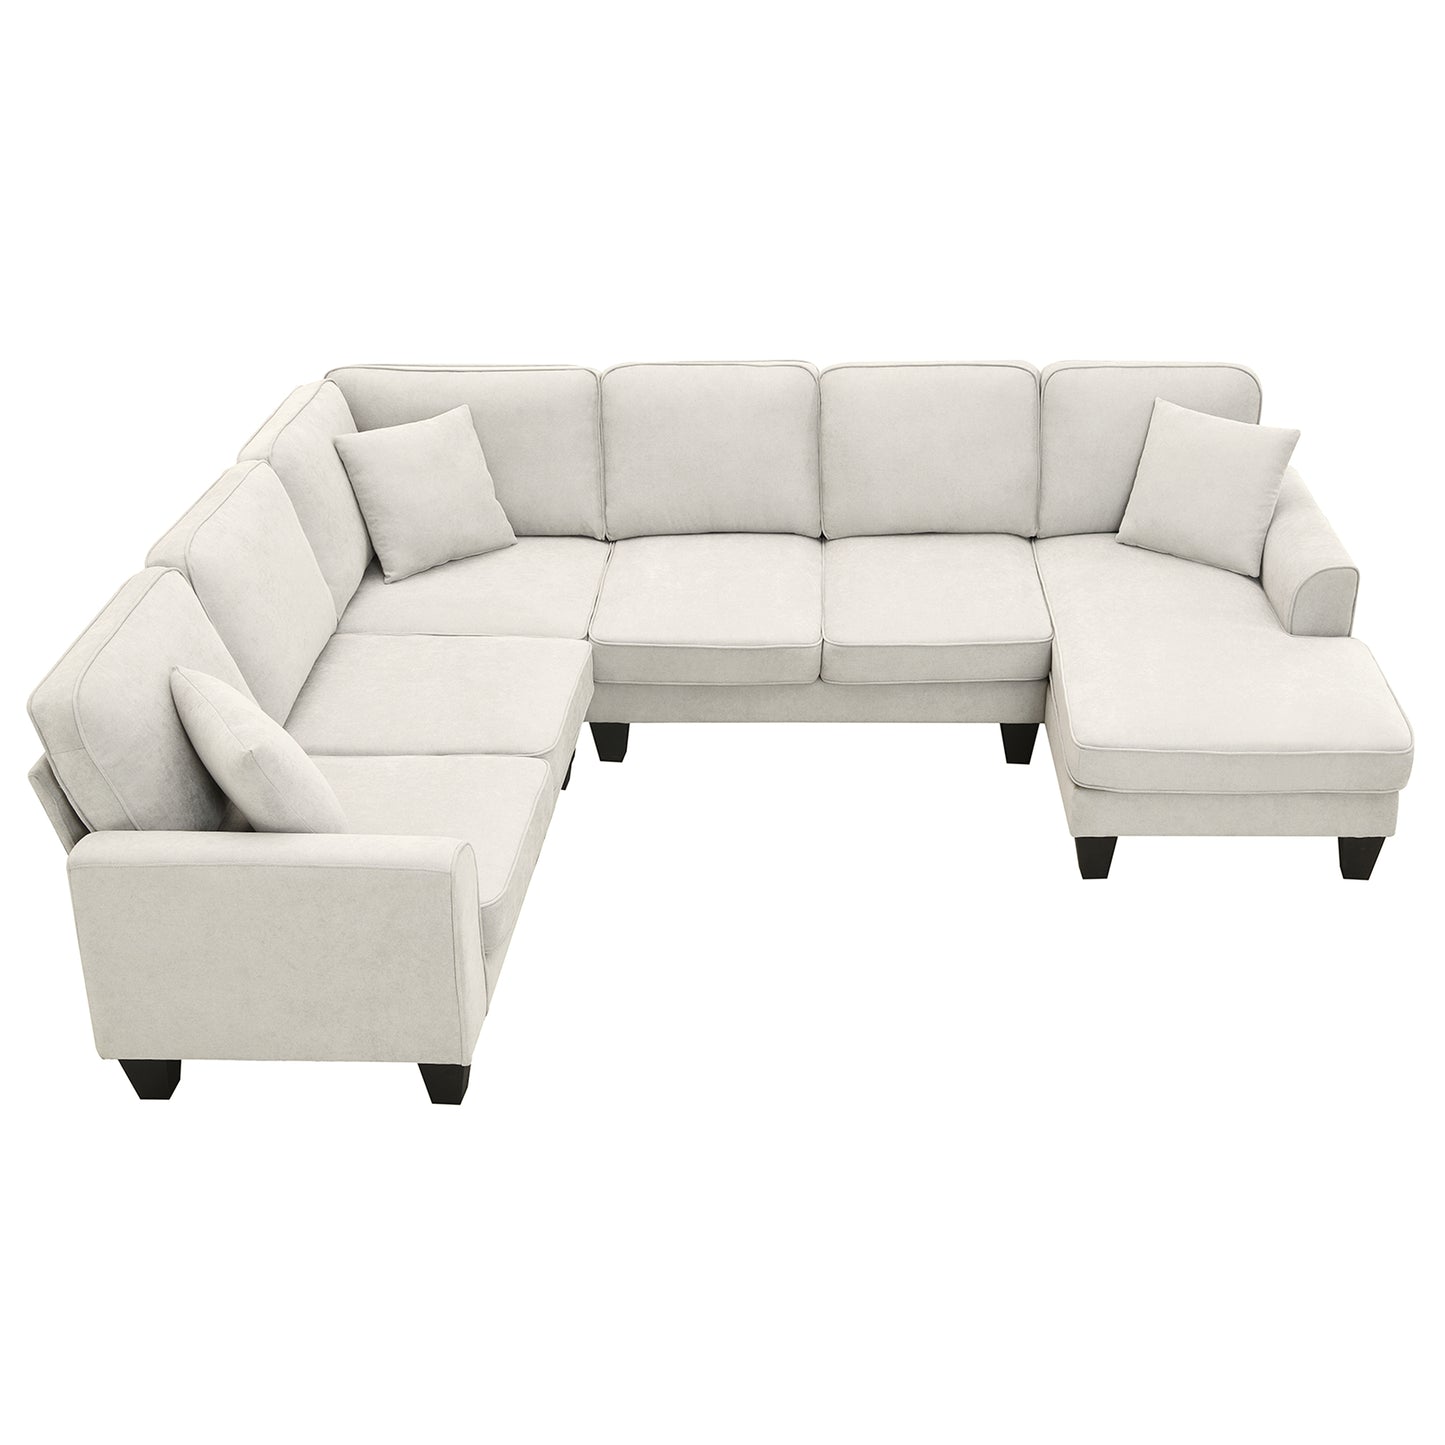 7 Seat Fabric Sectional Sofa Set with 3 Pillows